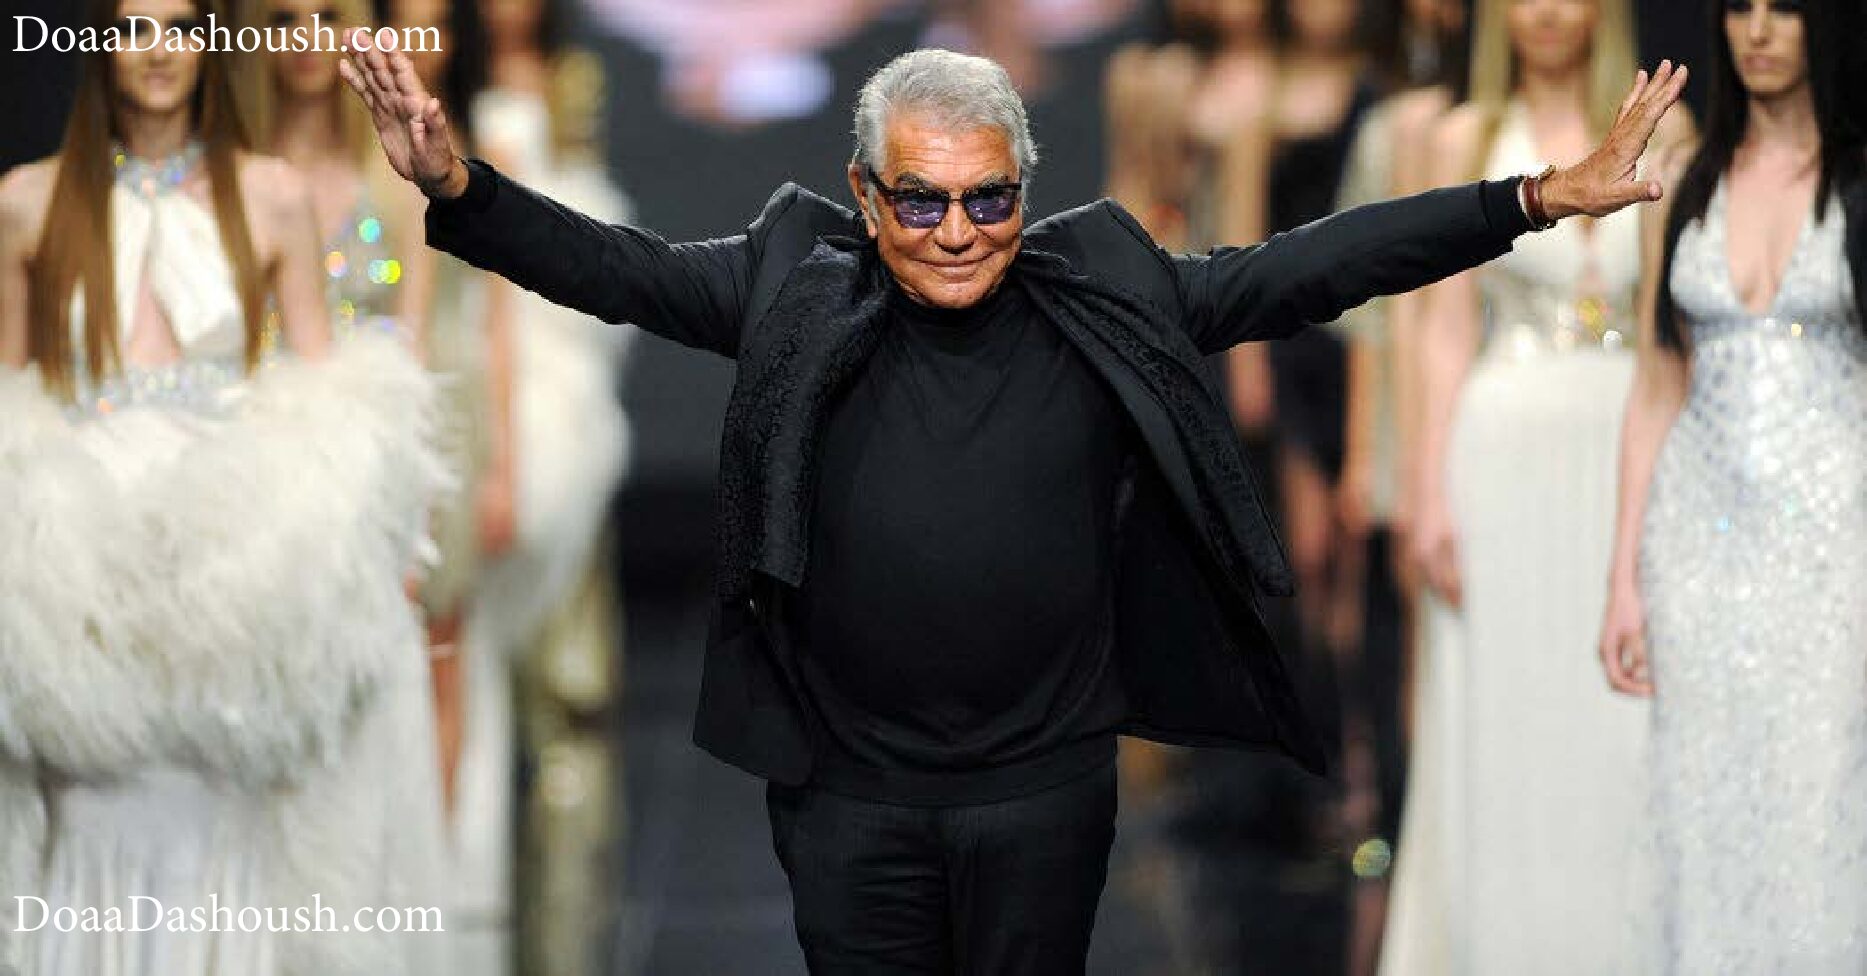 Roberto Cavalli: A Life Lived with Love and Lived in Prints